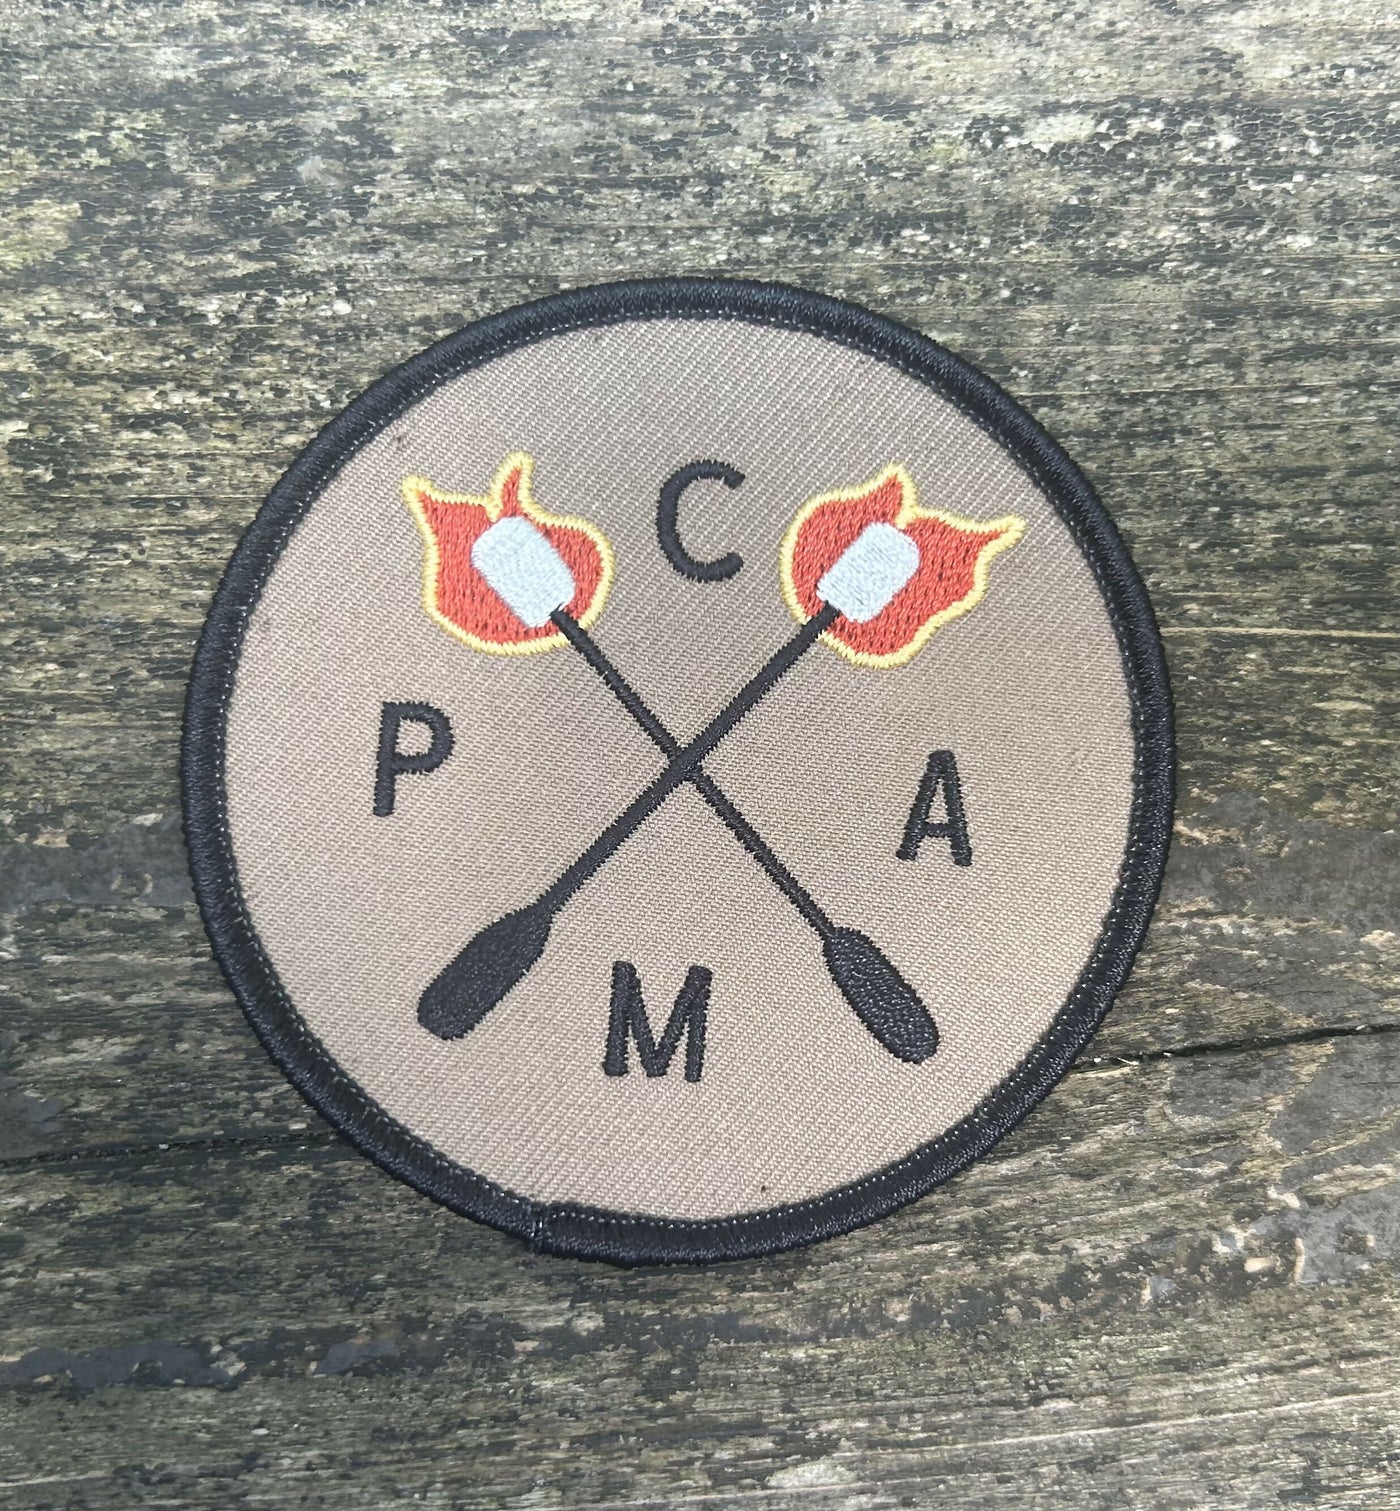 Camp embroidered patch